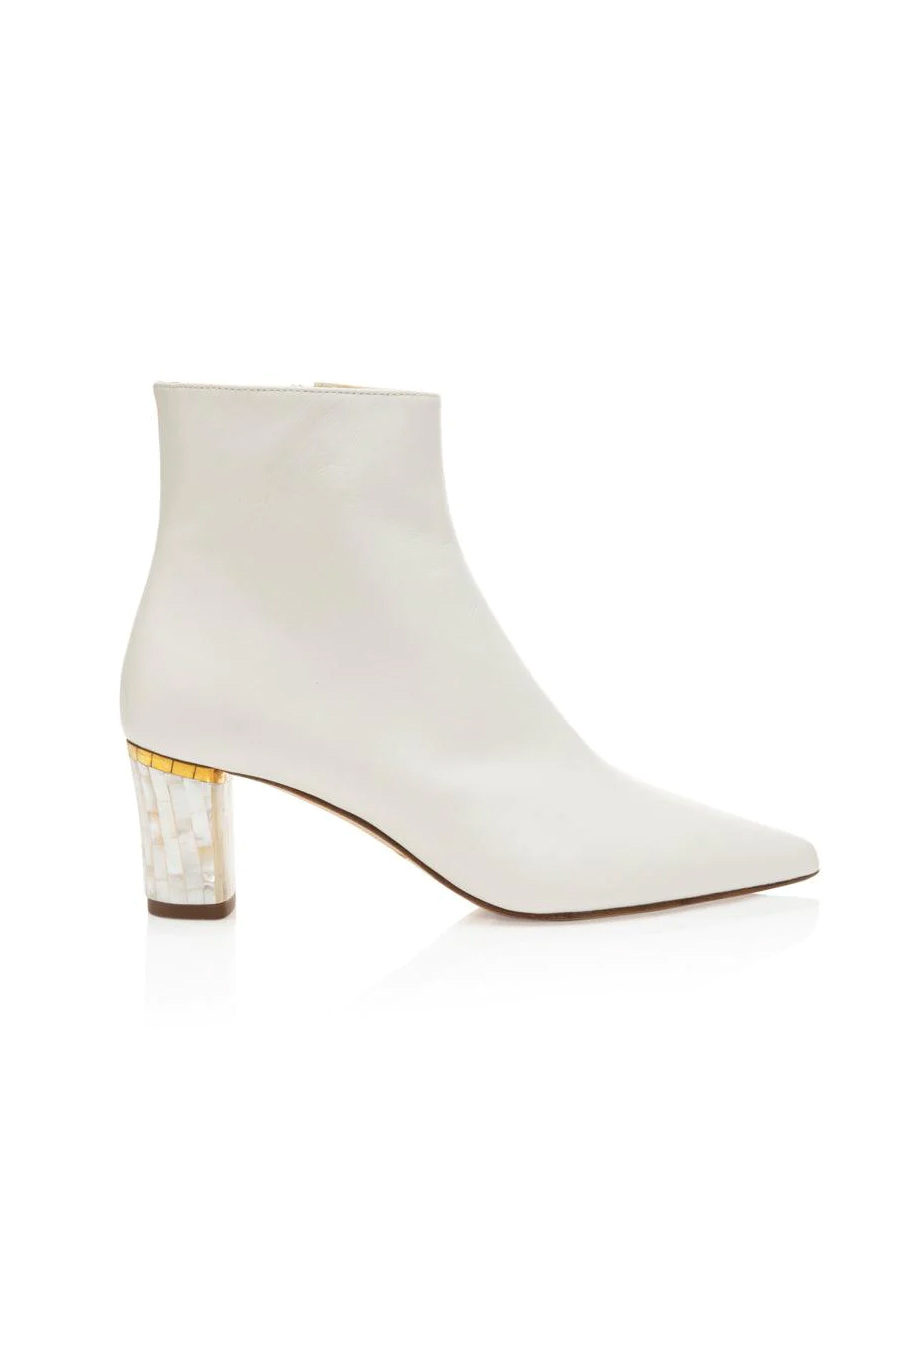 June White Boots Pearl Heel